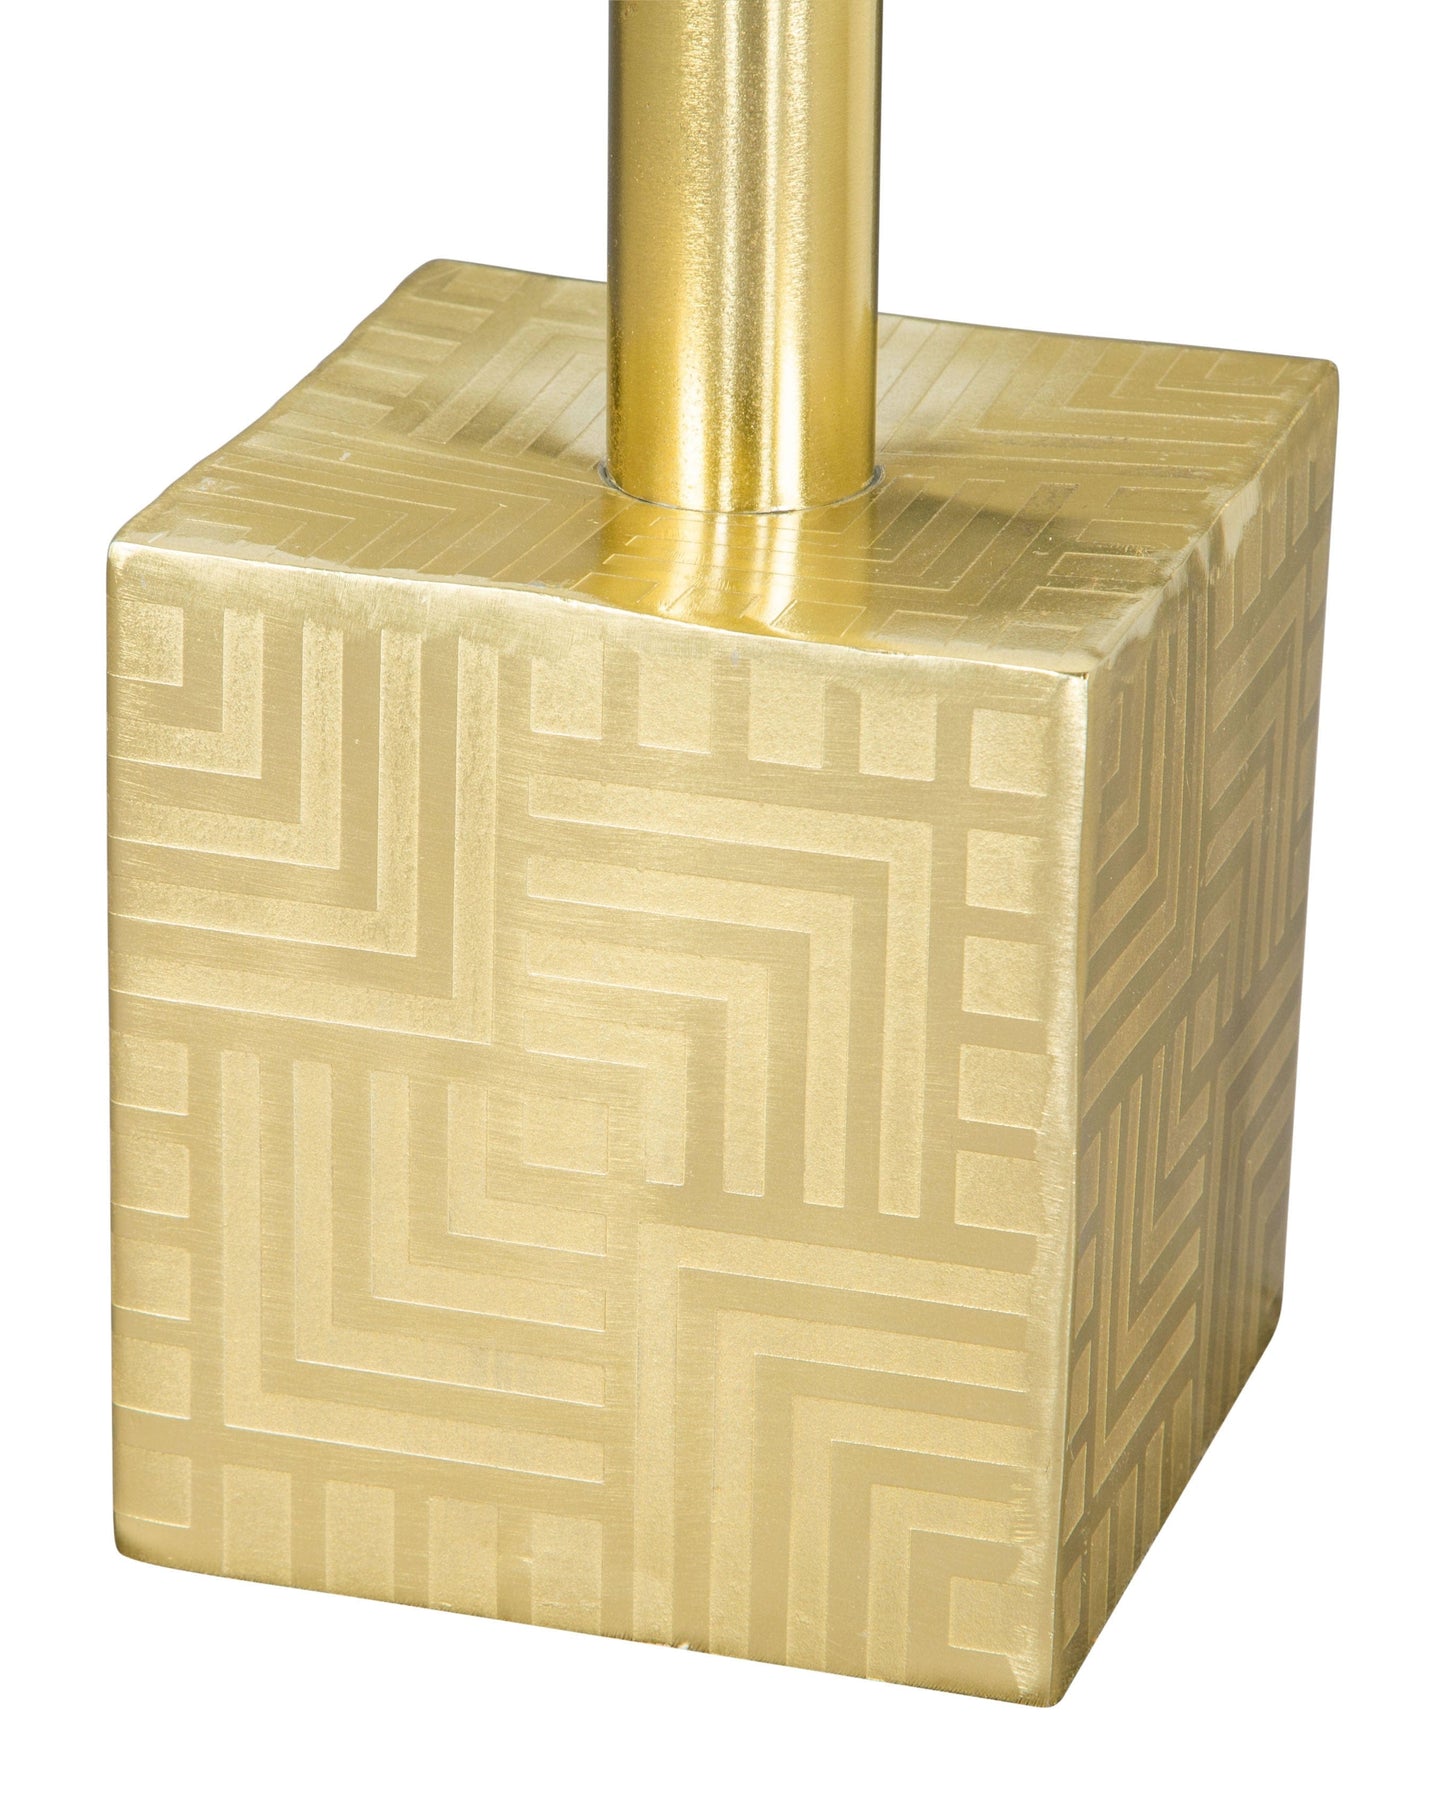 Base with gold design